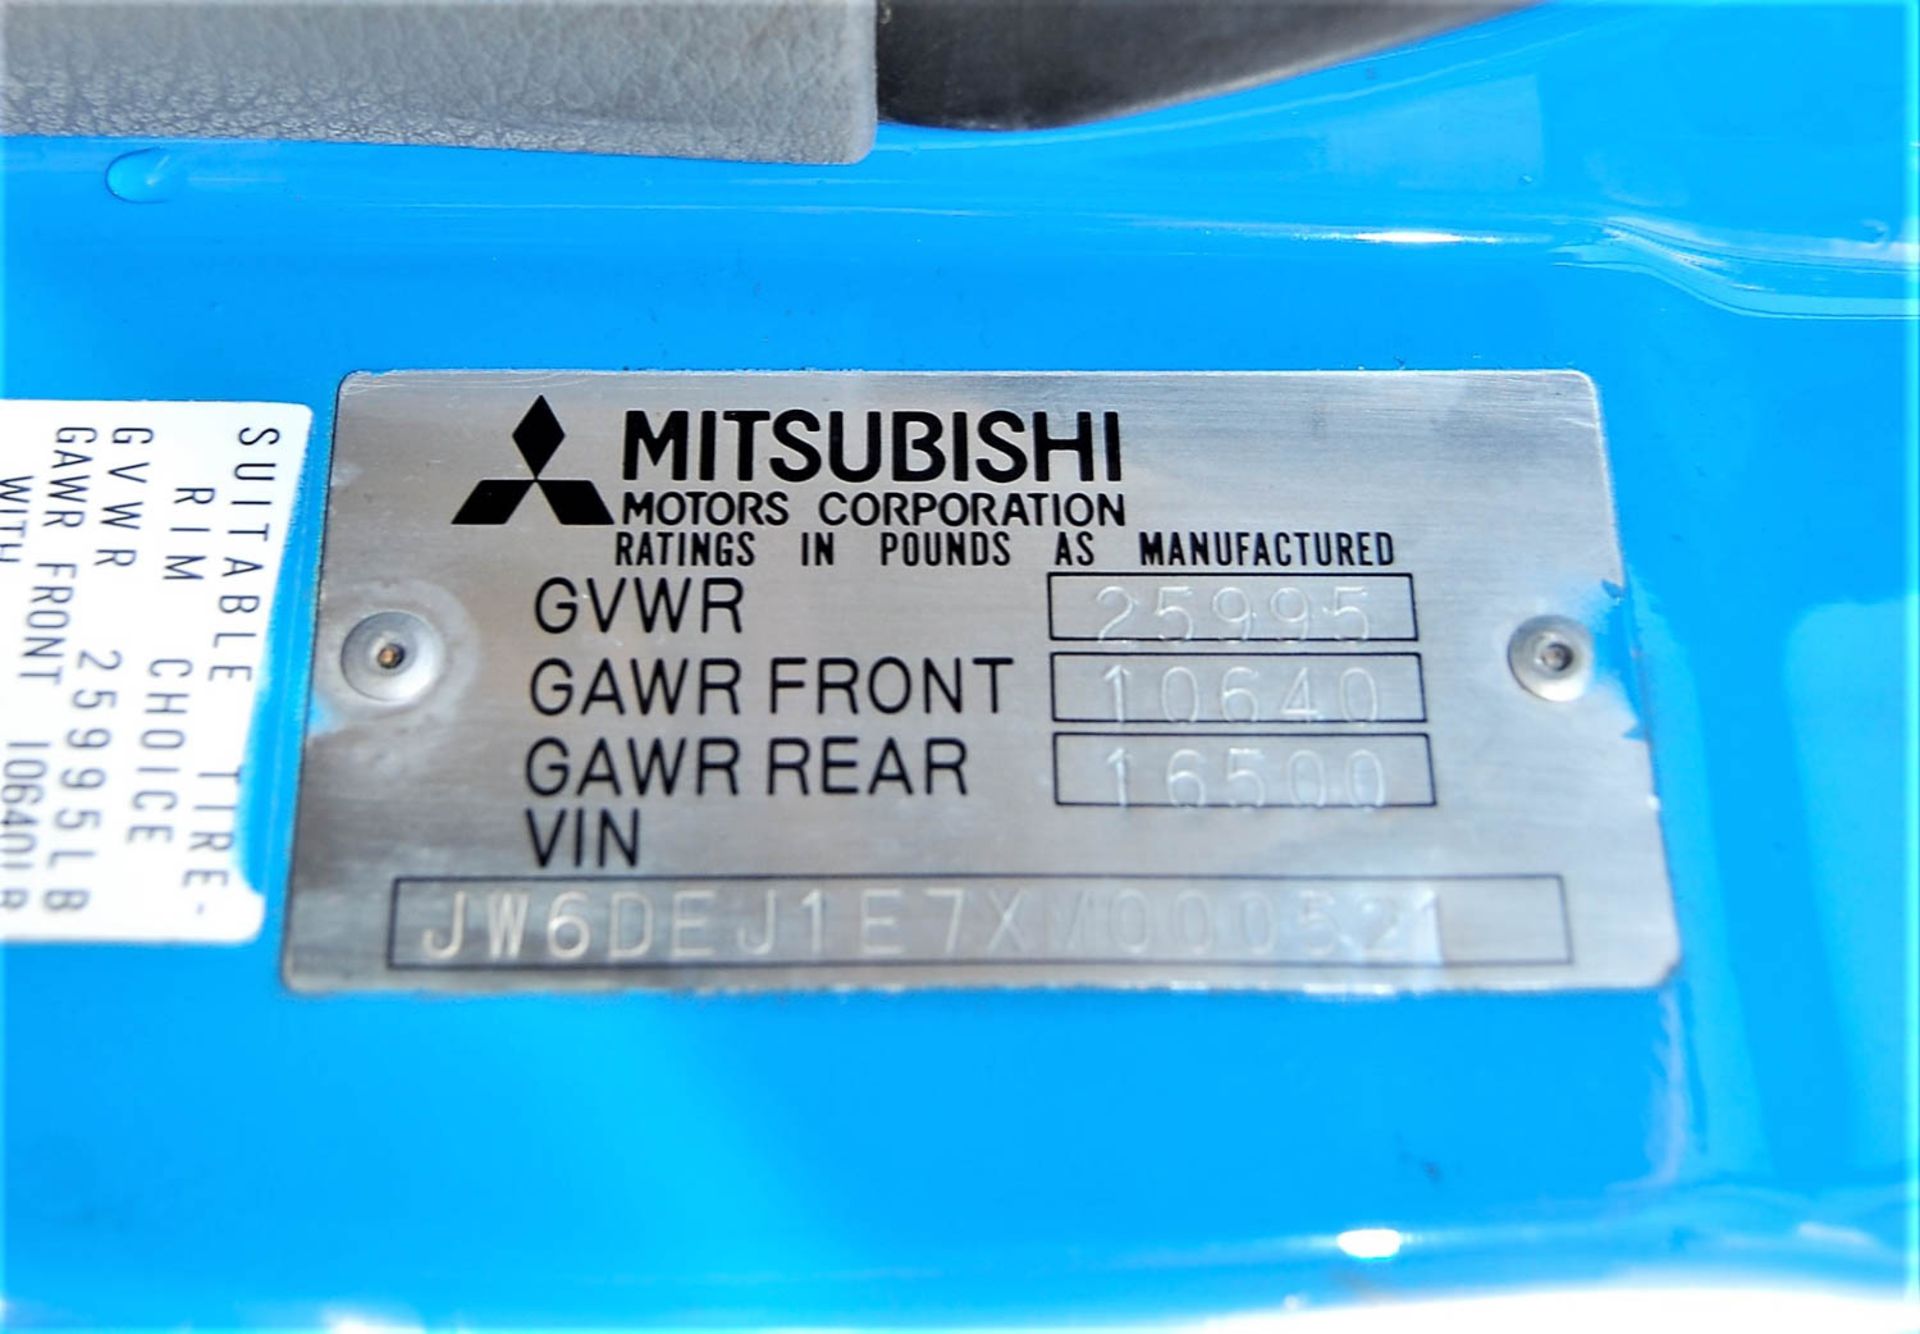 MITSUBISHI 10' FLATBED TRUCK, 5-SPEED MANUAL, APPROXIMATELY 230,728 ON ODOMETER, 25,995 GVWR, VIN: - Image 15 of 16